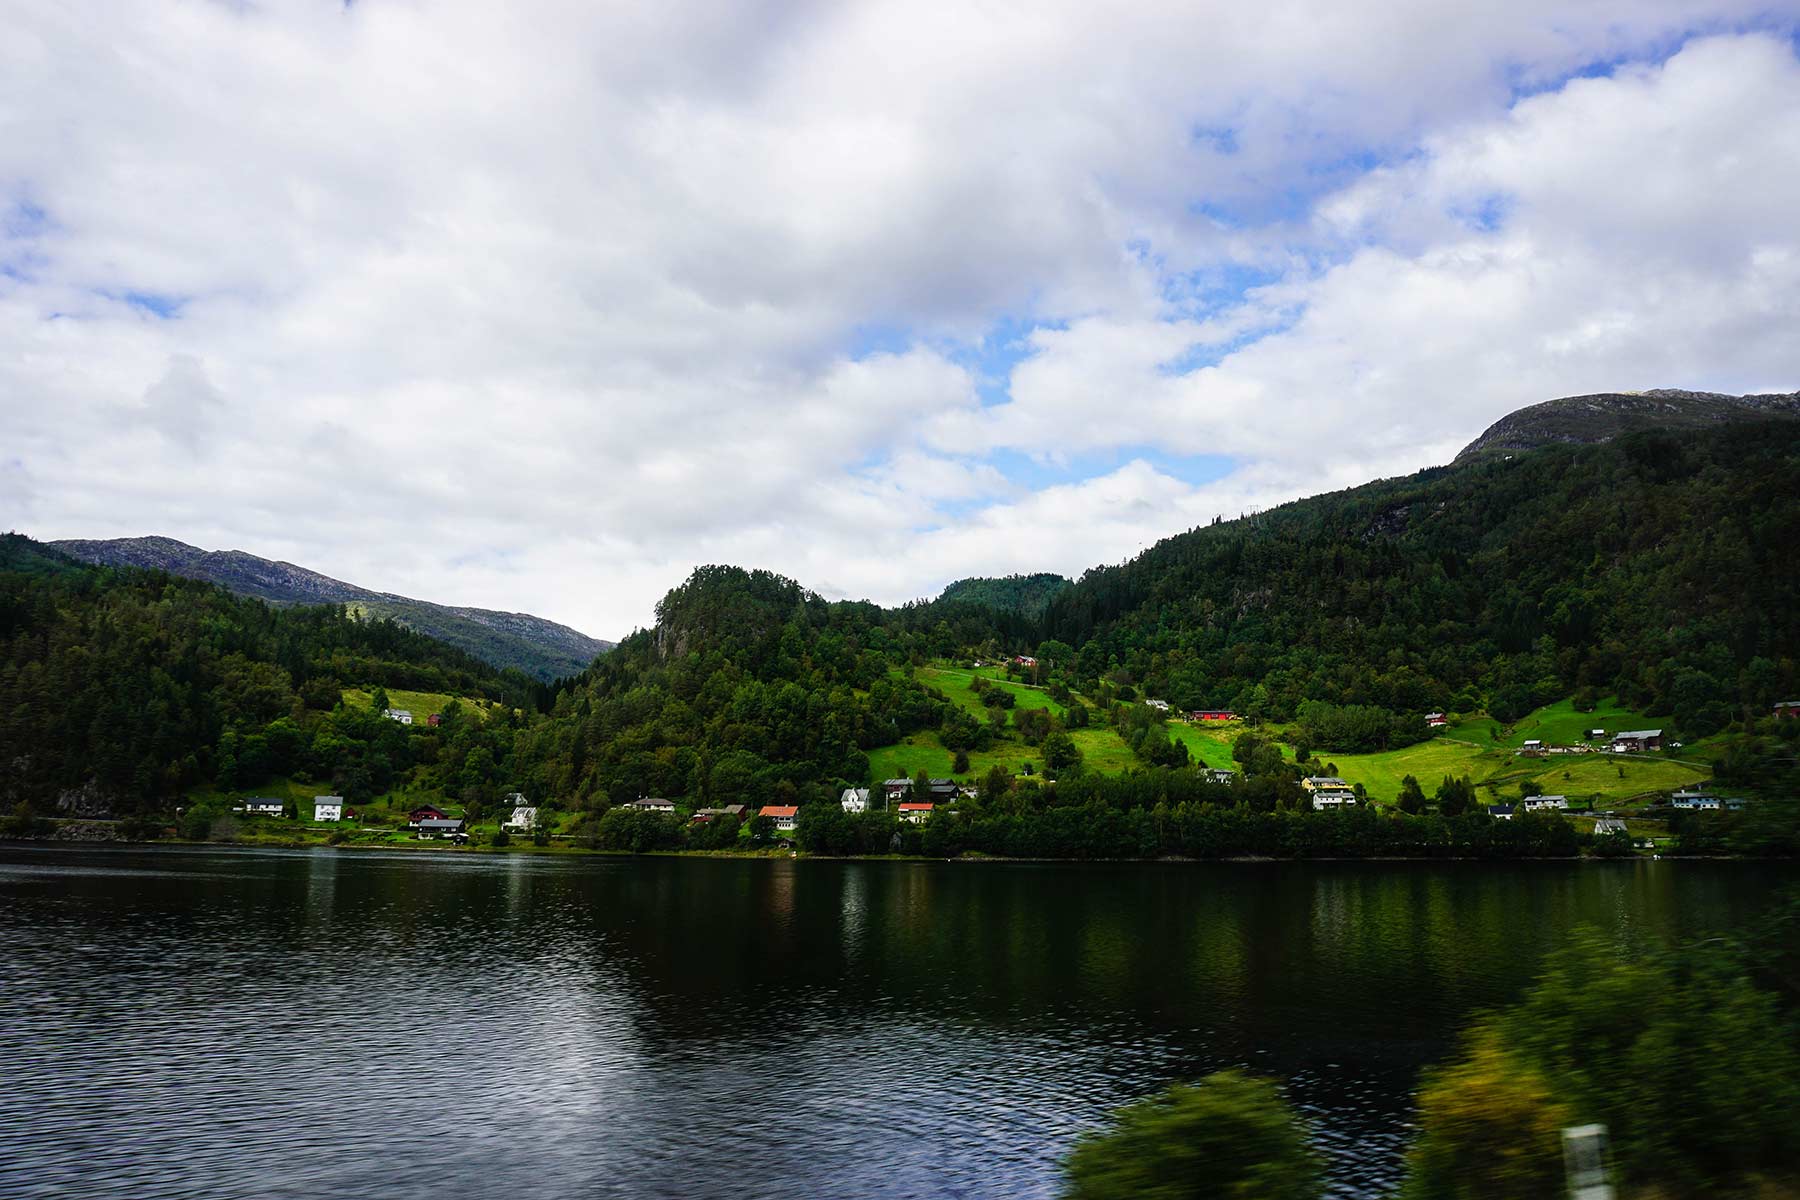 A picture of a lake with rolling green hills and trees in the background.